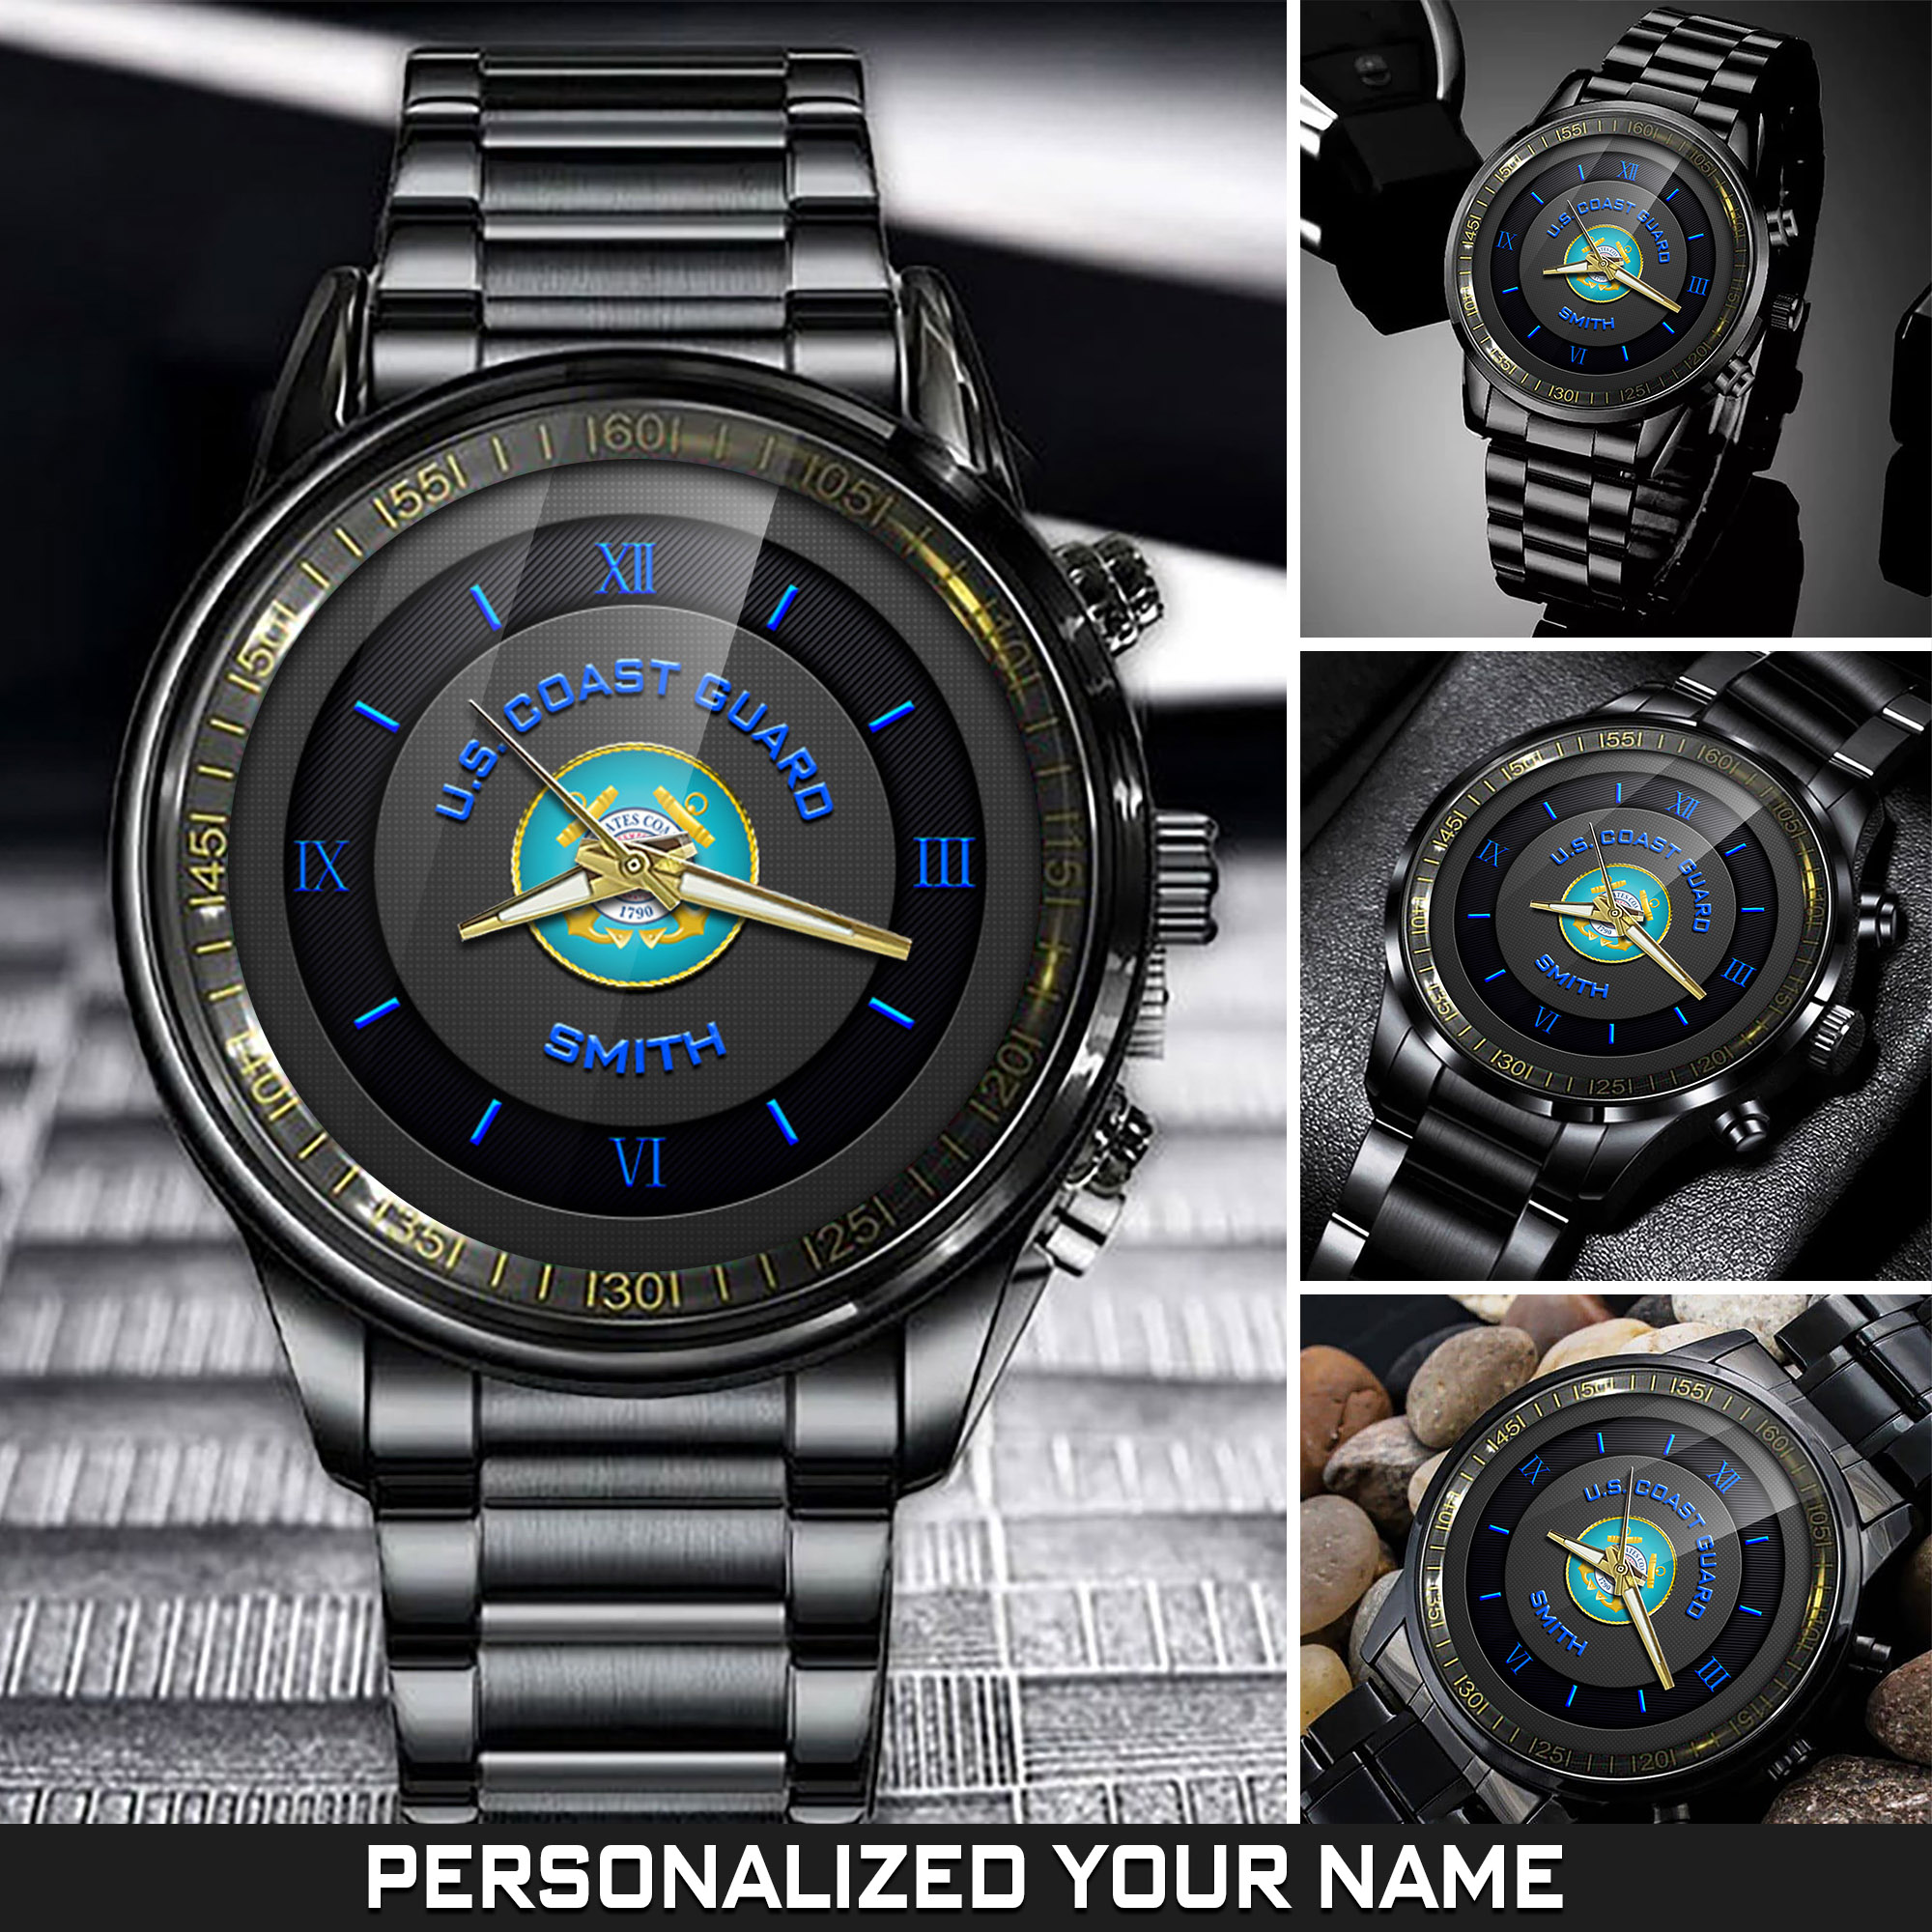 Personalized U.S. Coast Guard Black Fashion Watch With Your Name, Military Watches, Coast Guard Watches For Men, Gift For Veterans, Soldier Gifts